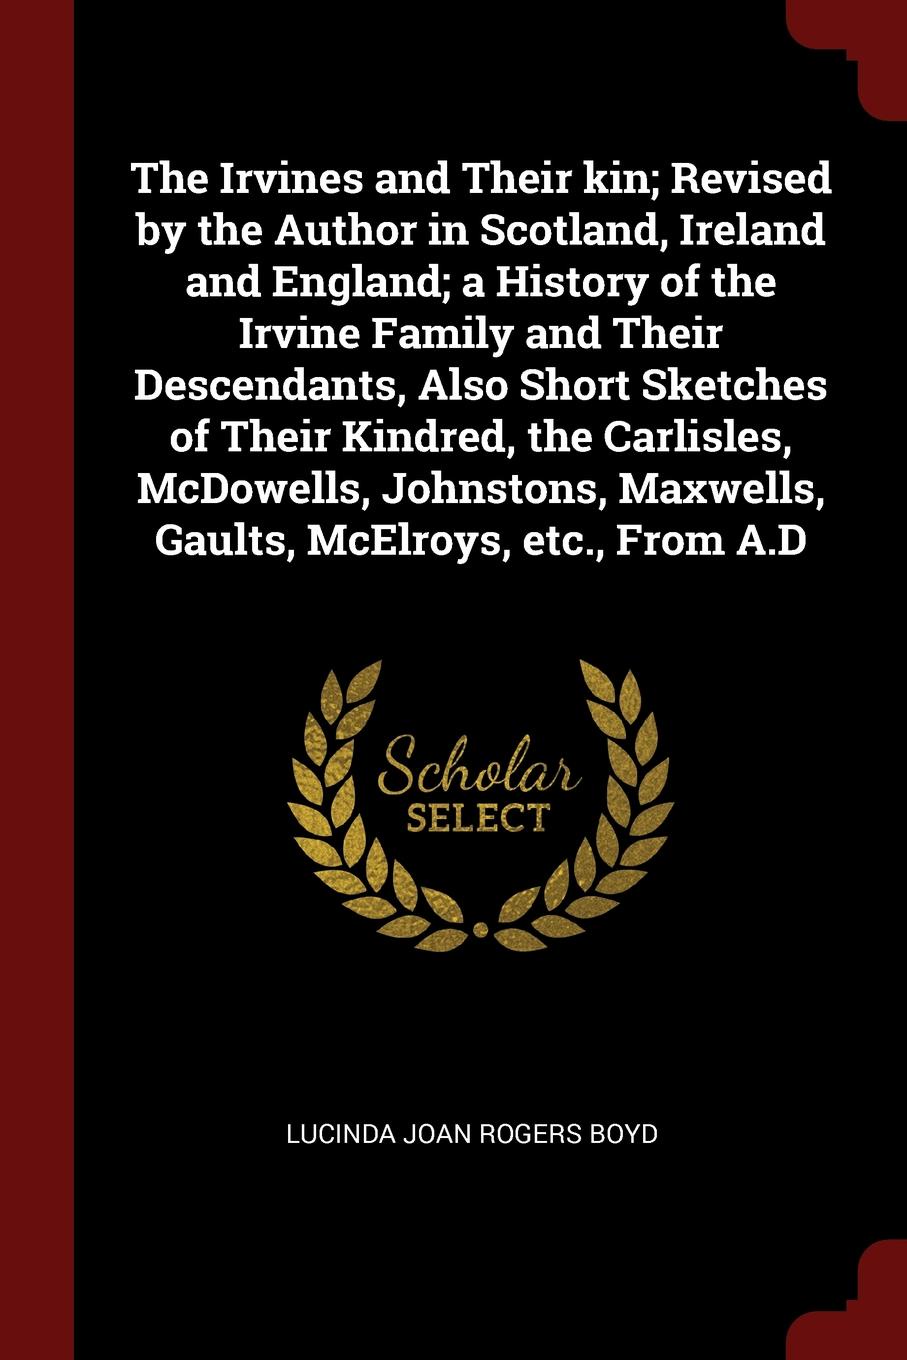 The Irvines and Their kin; Revised by the Author in Scotland, Ireland and England; a History of the Irvine Family and Their Descendants, Also Short Sketches of Their Kindred, the Carlisles, McDowells, Johnstons, Maxwells, Gaults, McElroys, etc., F...